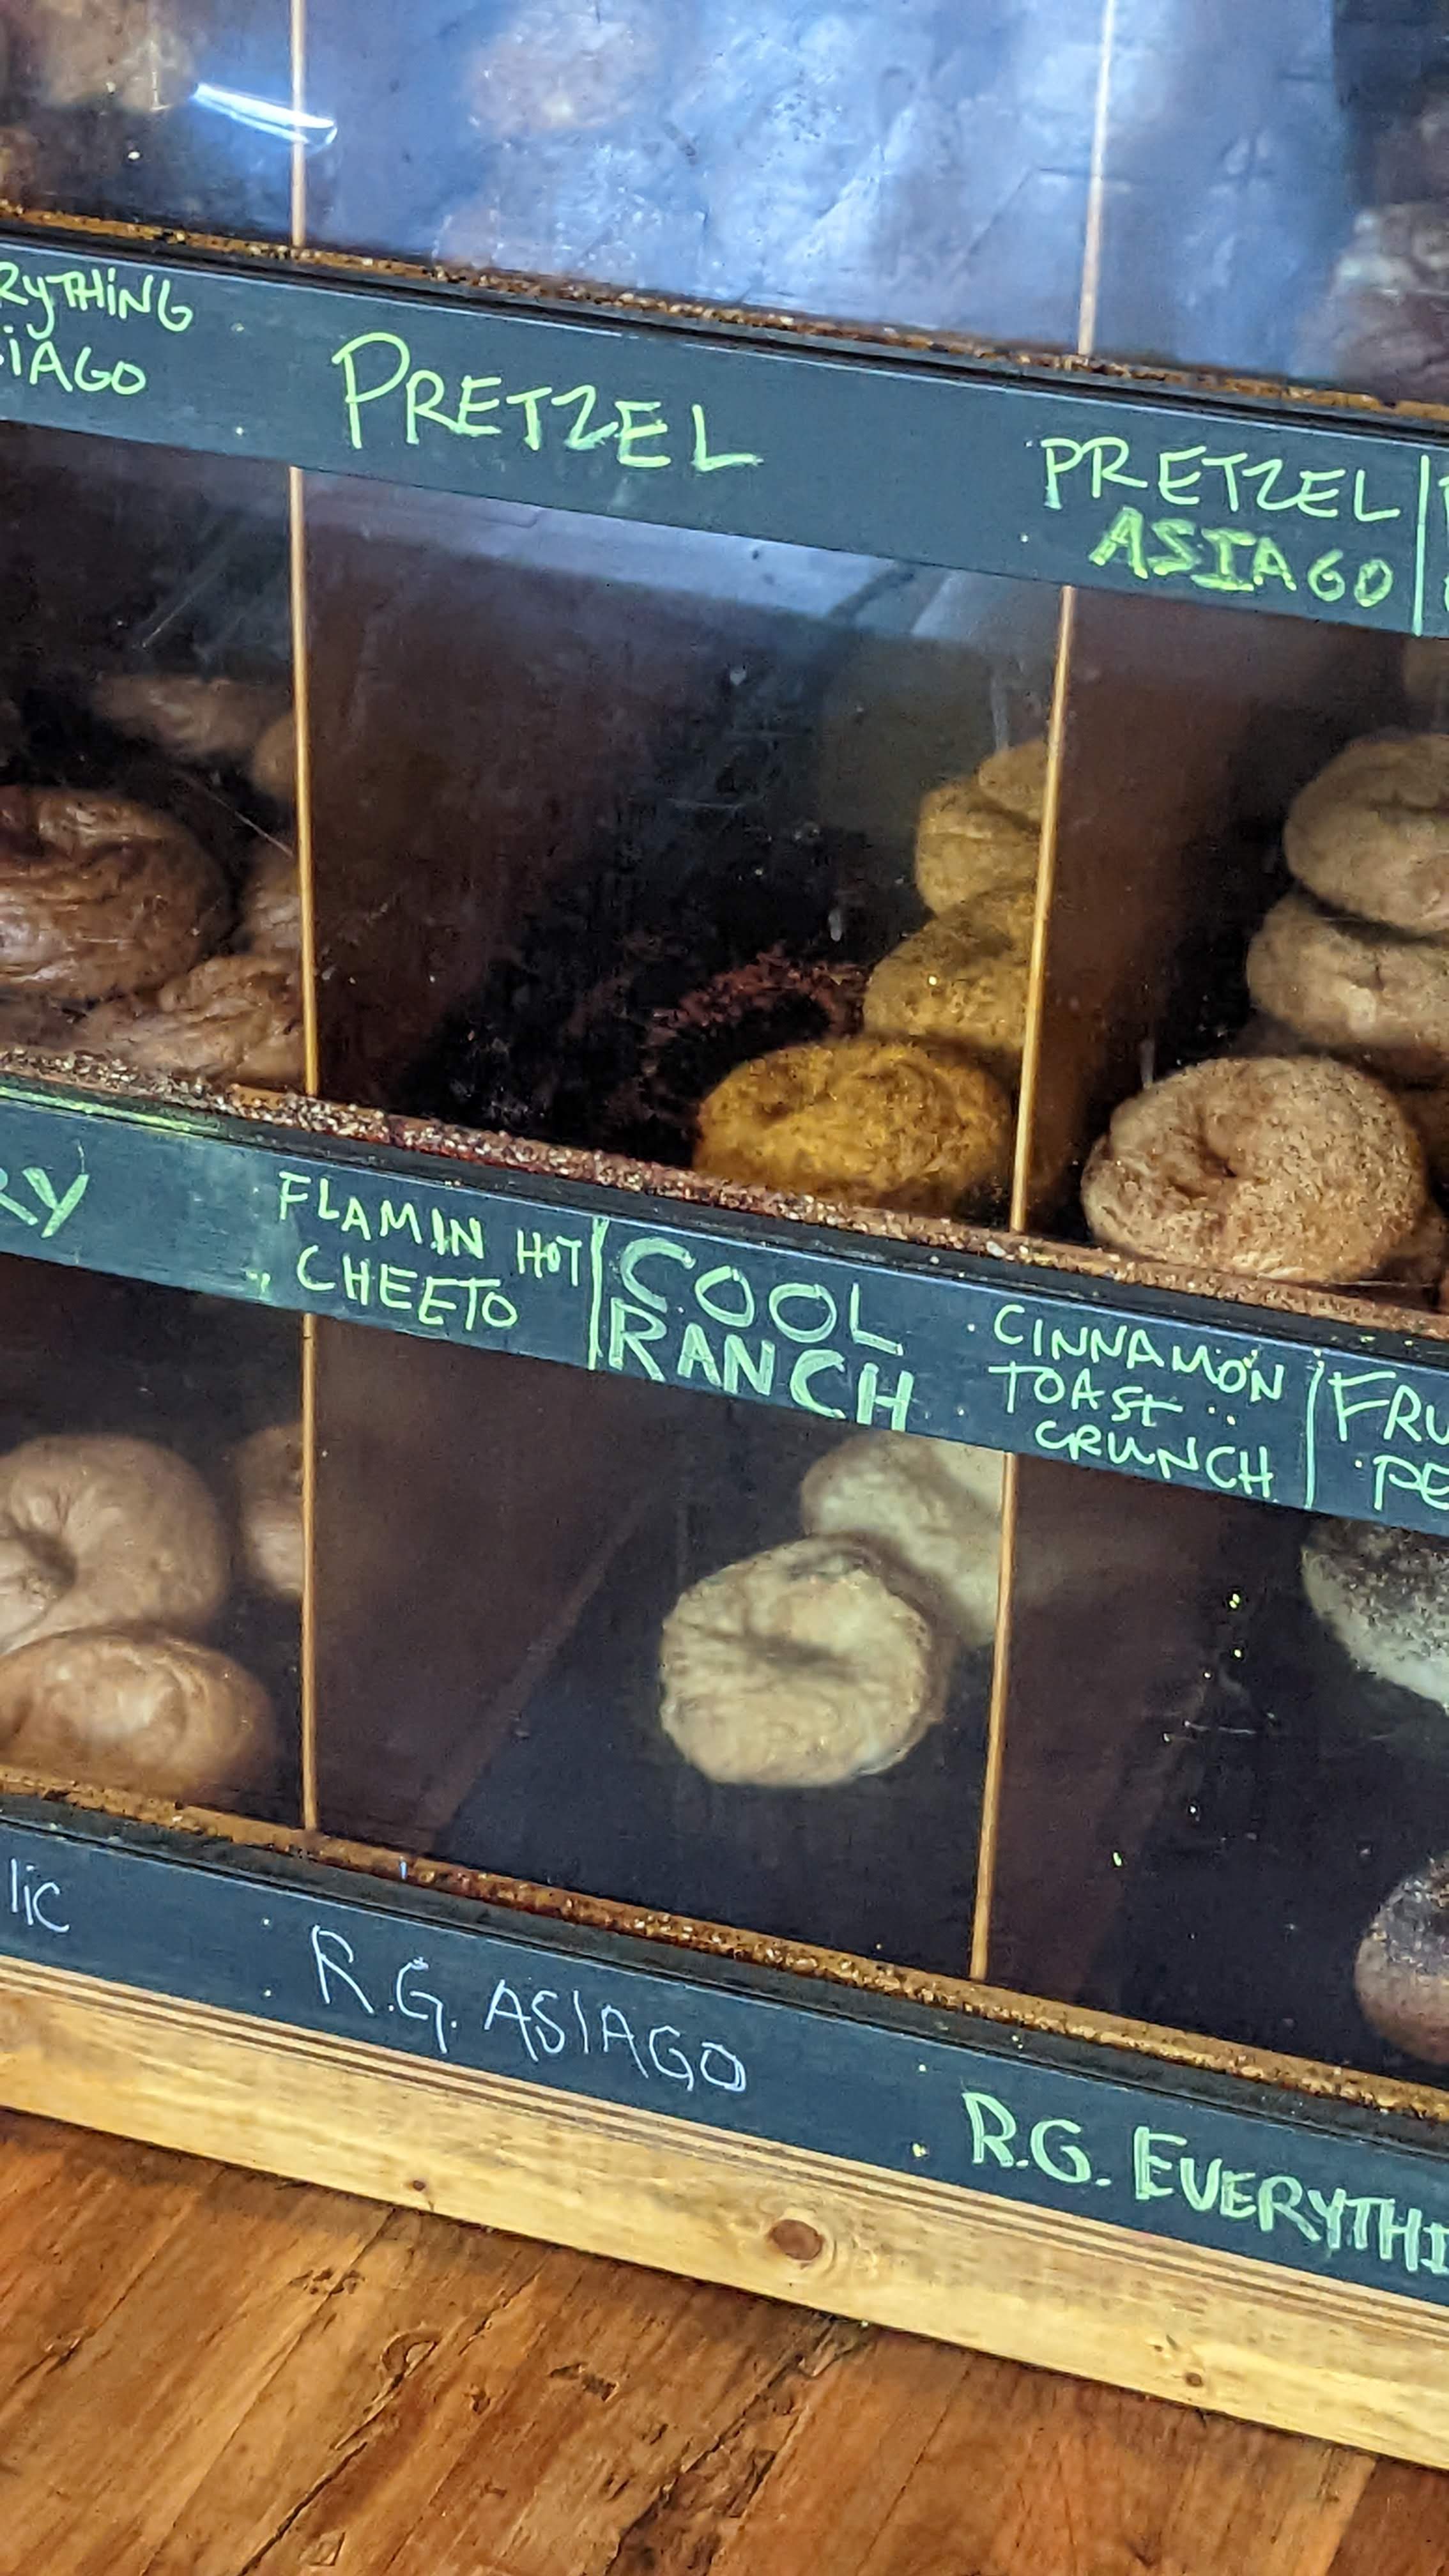 Bagel case with Flaming Hot Bagels sold out.